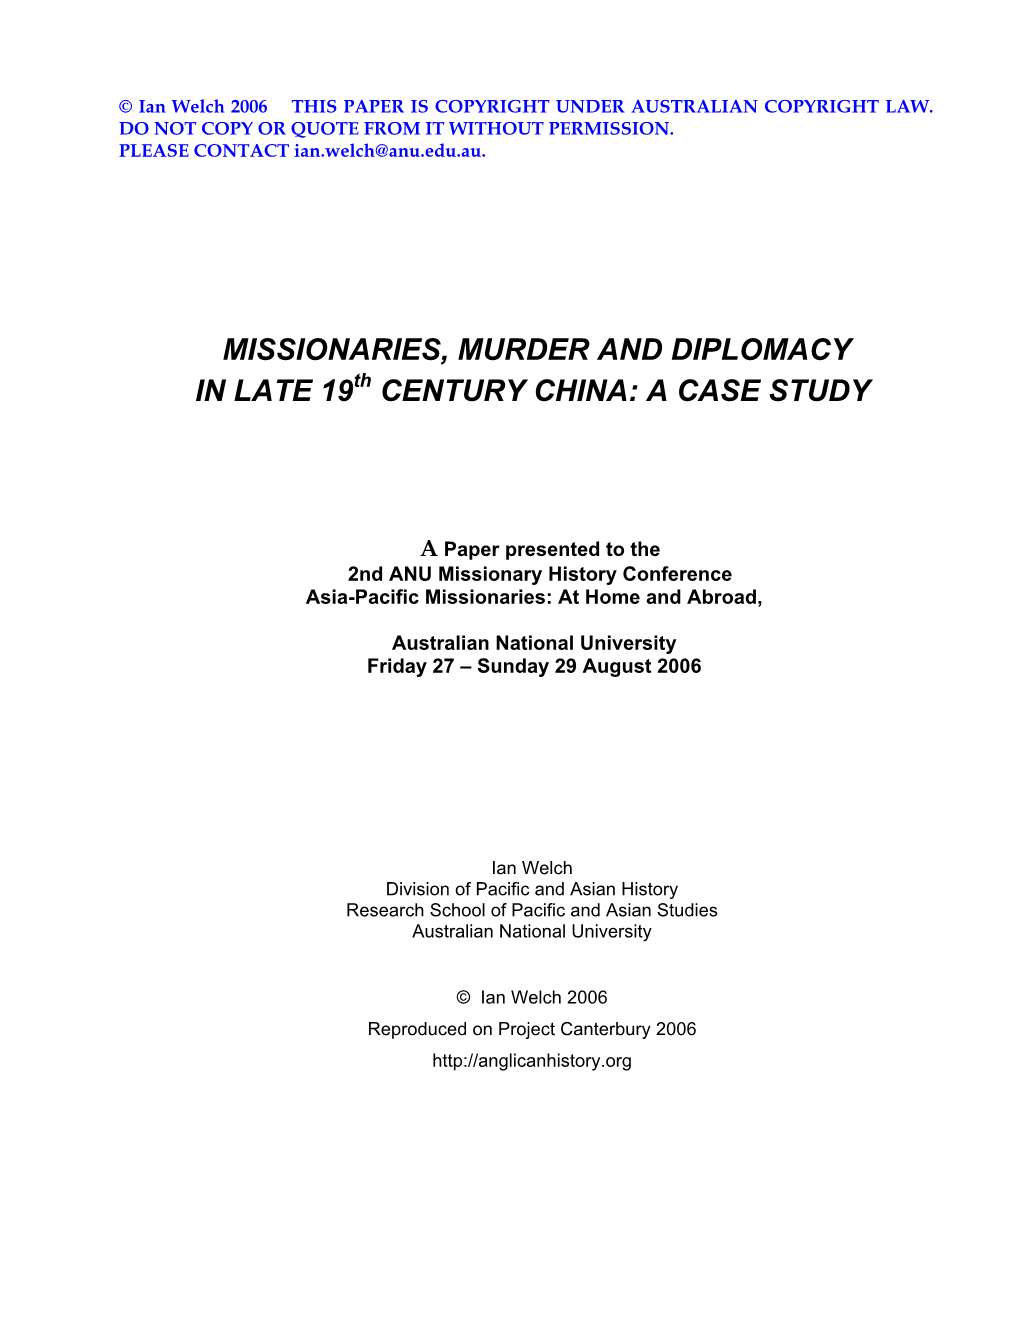 MISSIONARIES, MURDER and DIPLOMACY in LATE 19Th CENTURY CHINA: a CASE STUDY